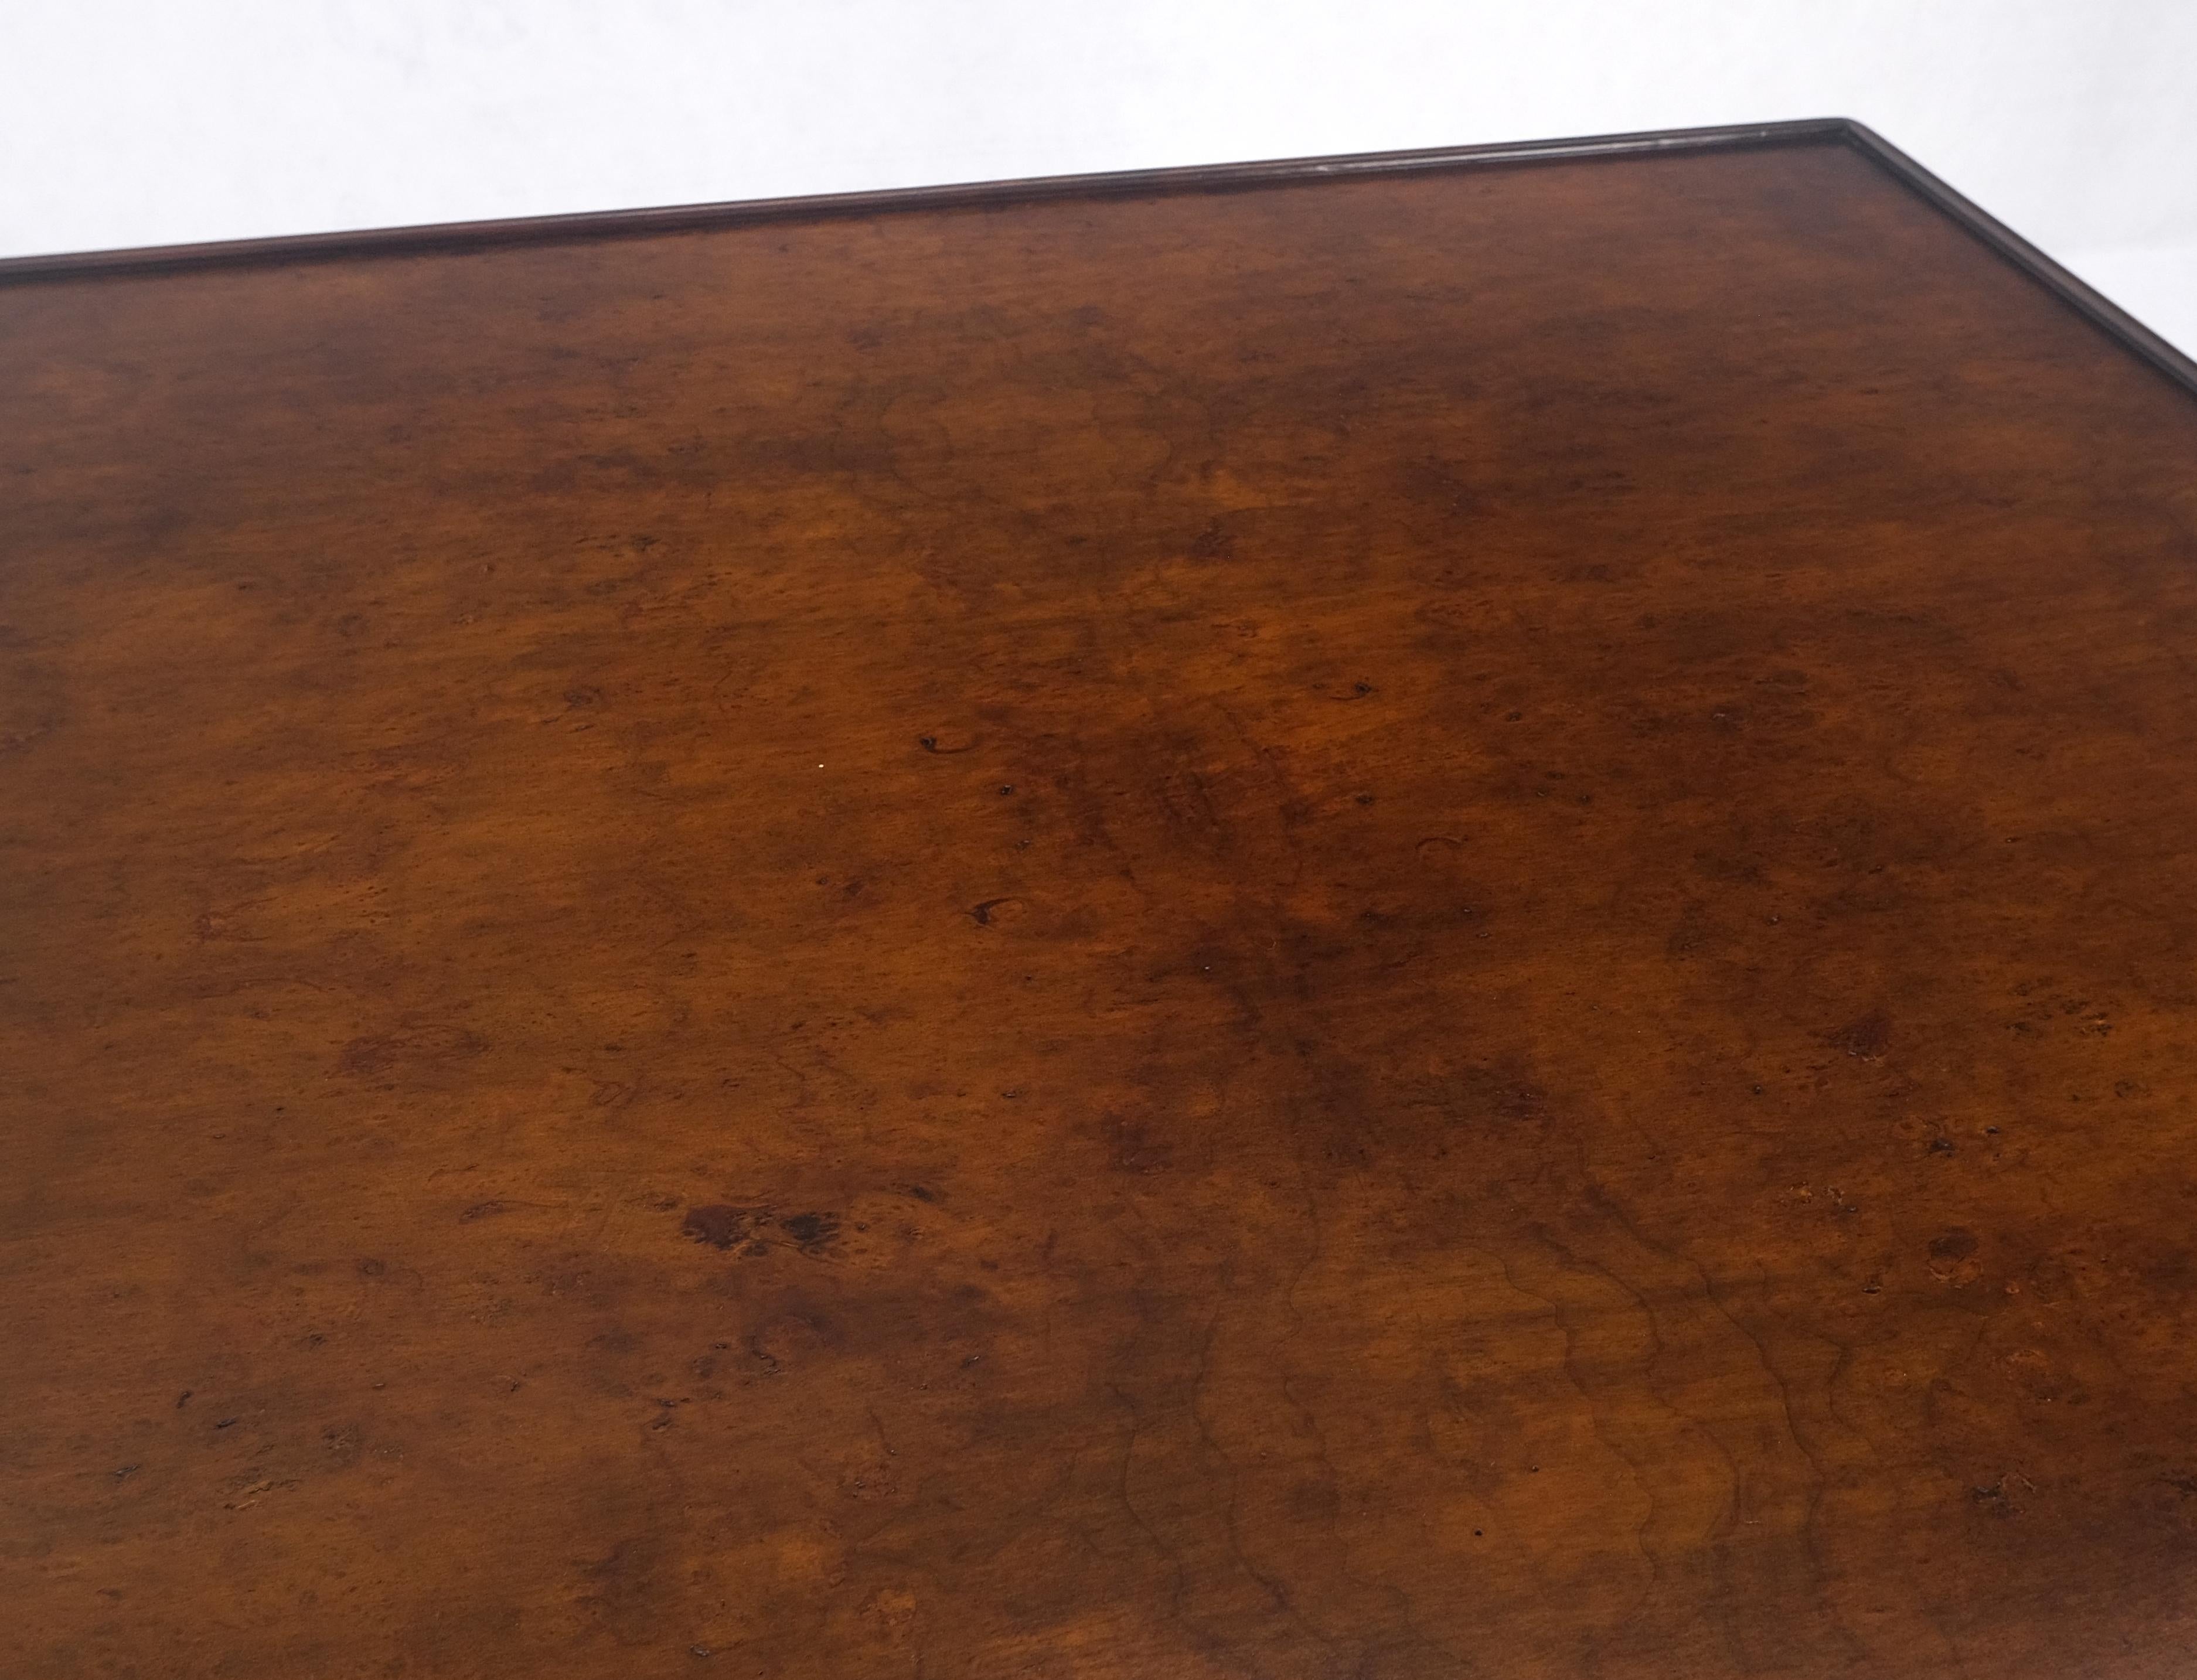 Large Honey Dark Amber Brown Burl Walnut Square Two Tier Coffee Table Wheel MINT In Excellent Condition For Sale In Rockaway, NJ